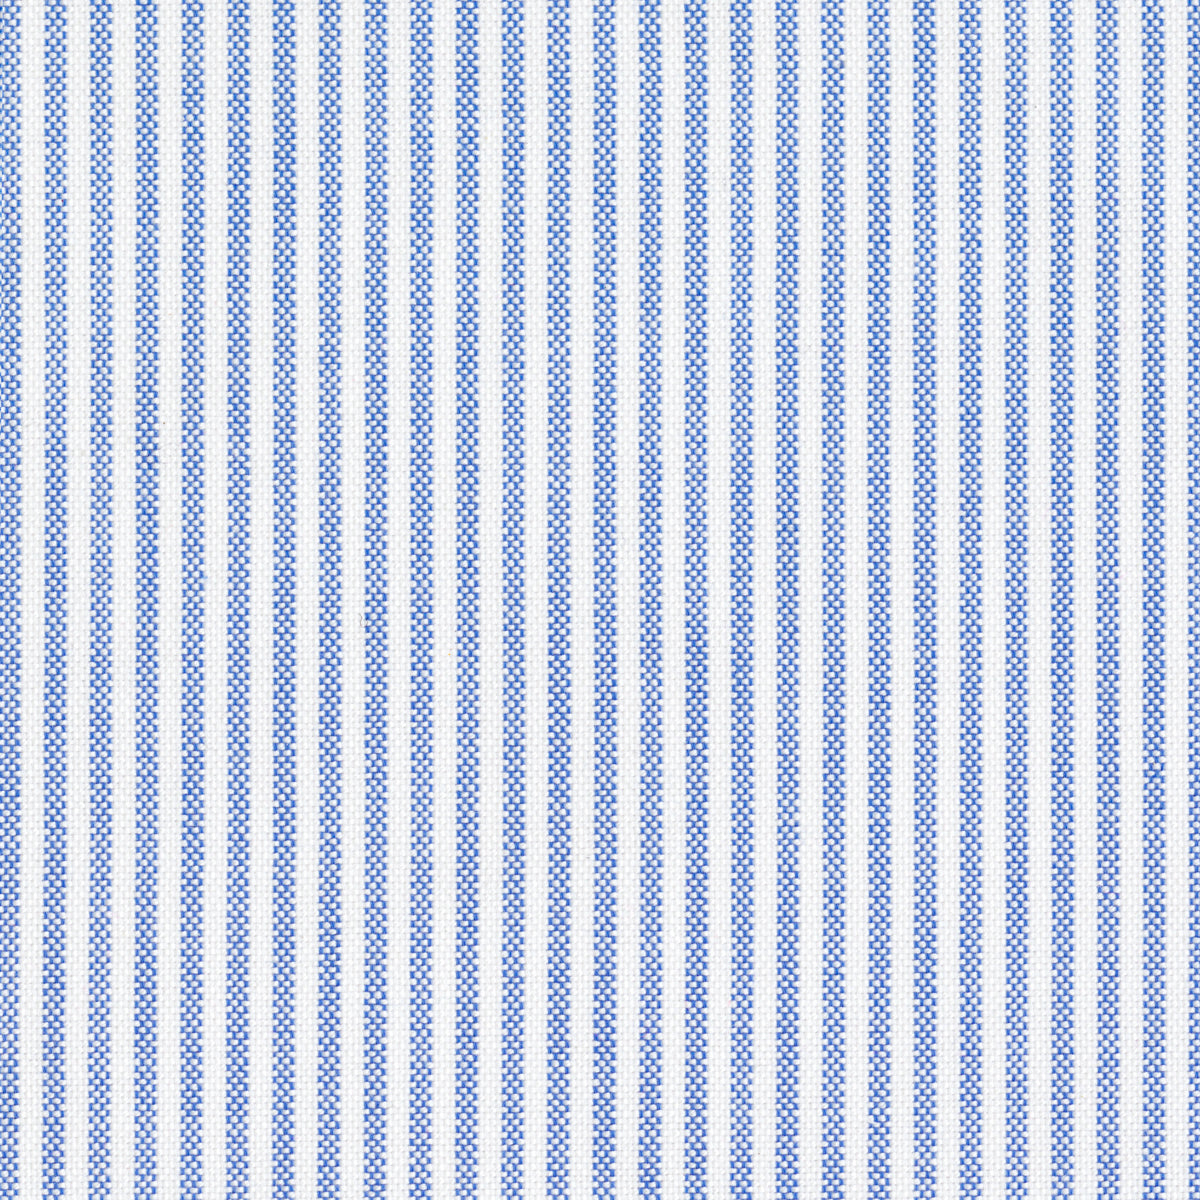 Made-to-Measure Shirt in Blue University Stripe Oxford